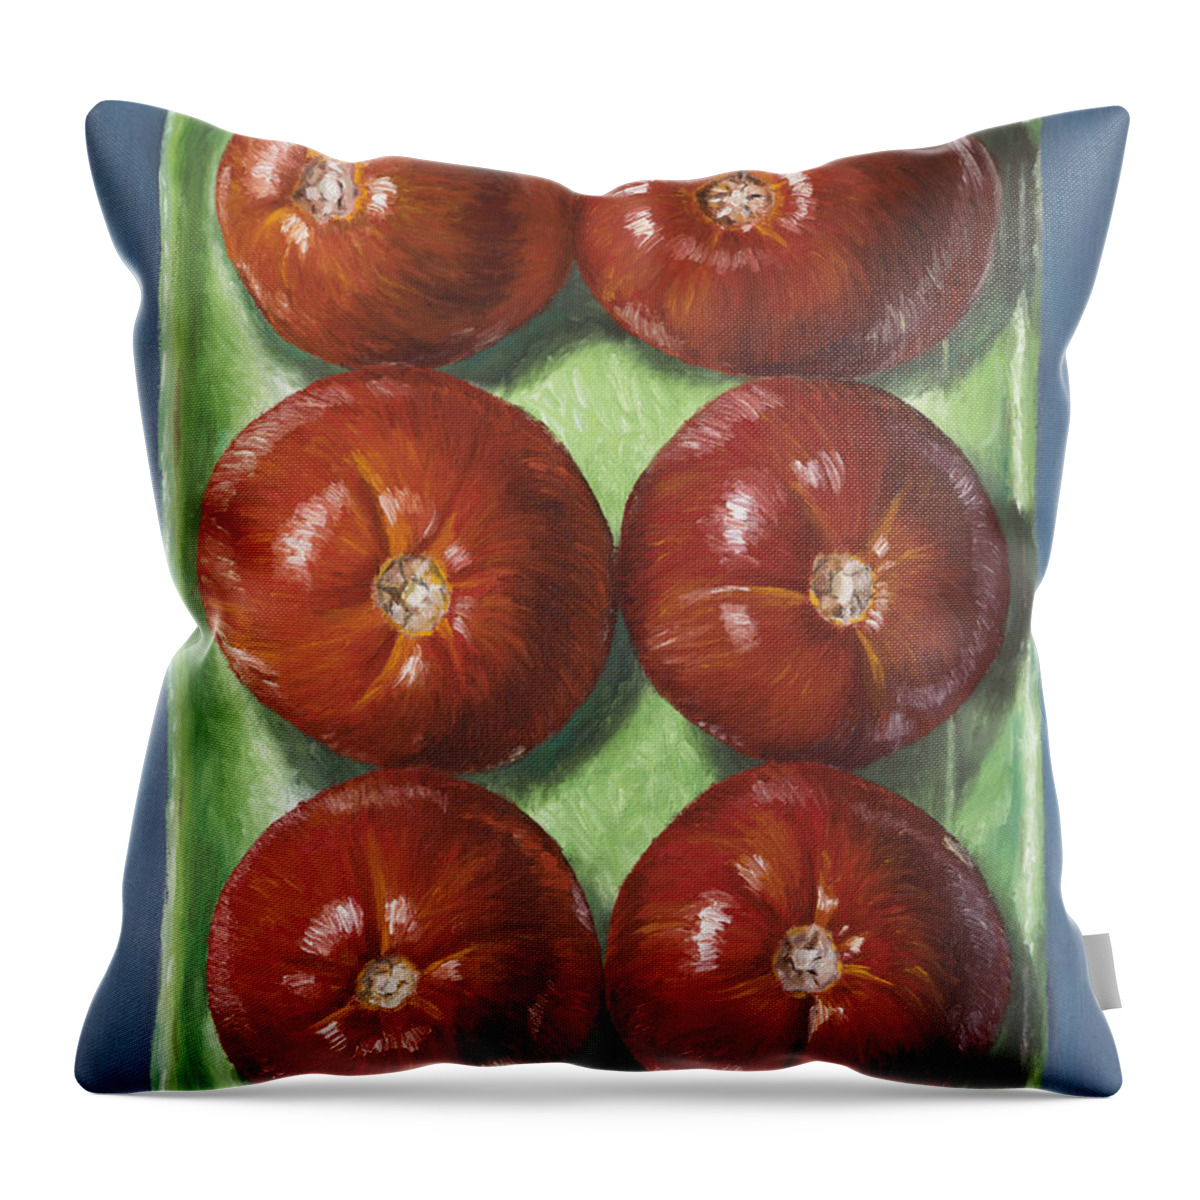 Tomatoes Throw Pillow featuring the digital art Tomatoes in Green Tray by Jim Zahniser